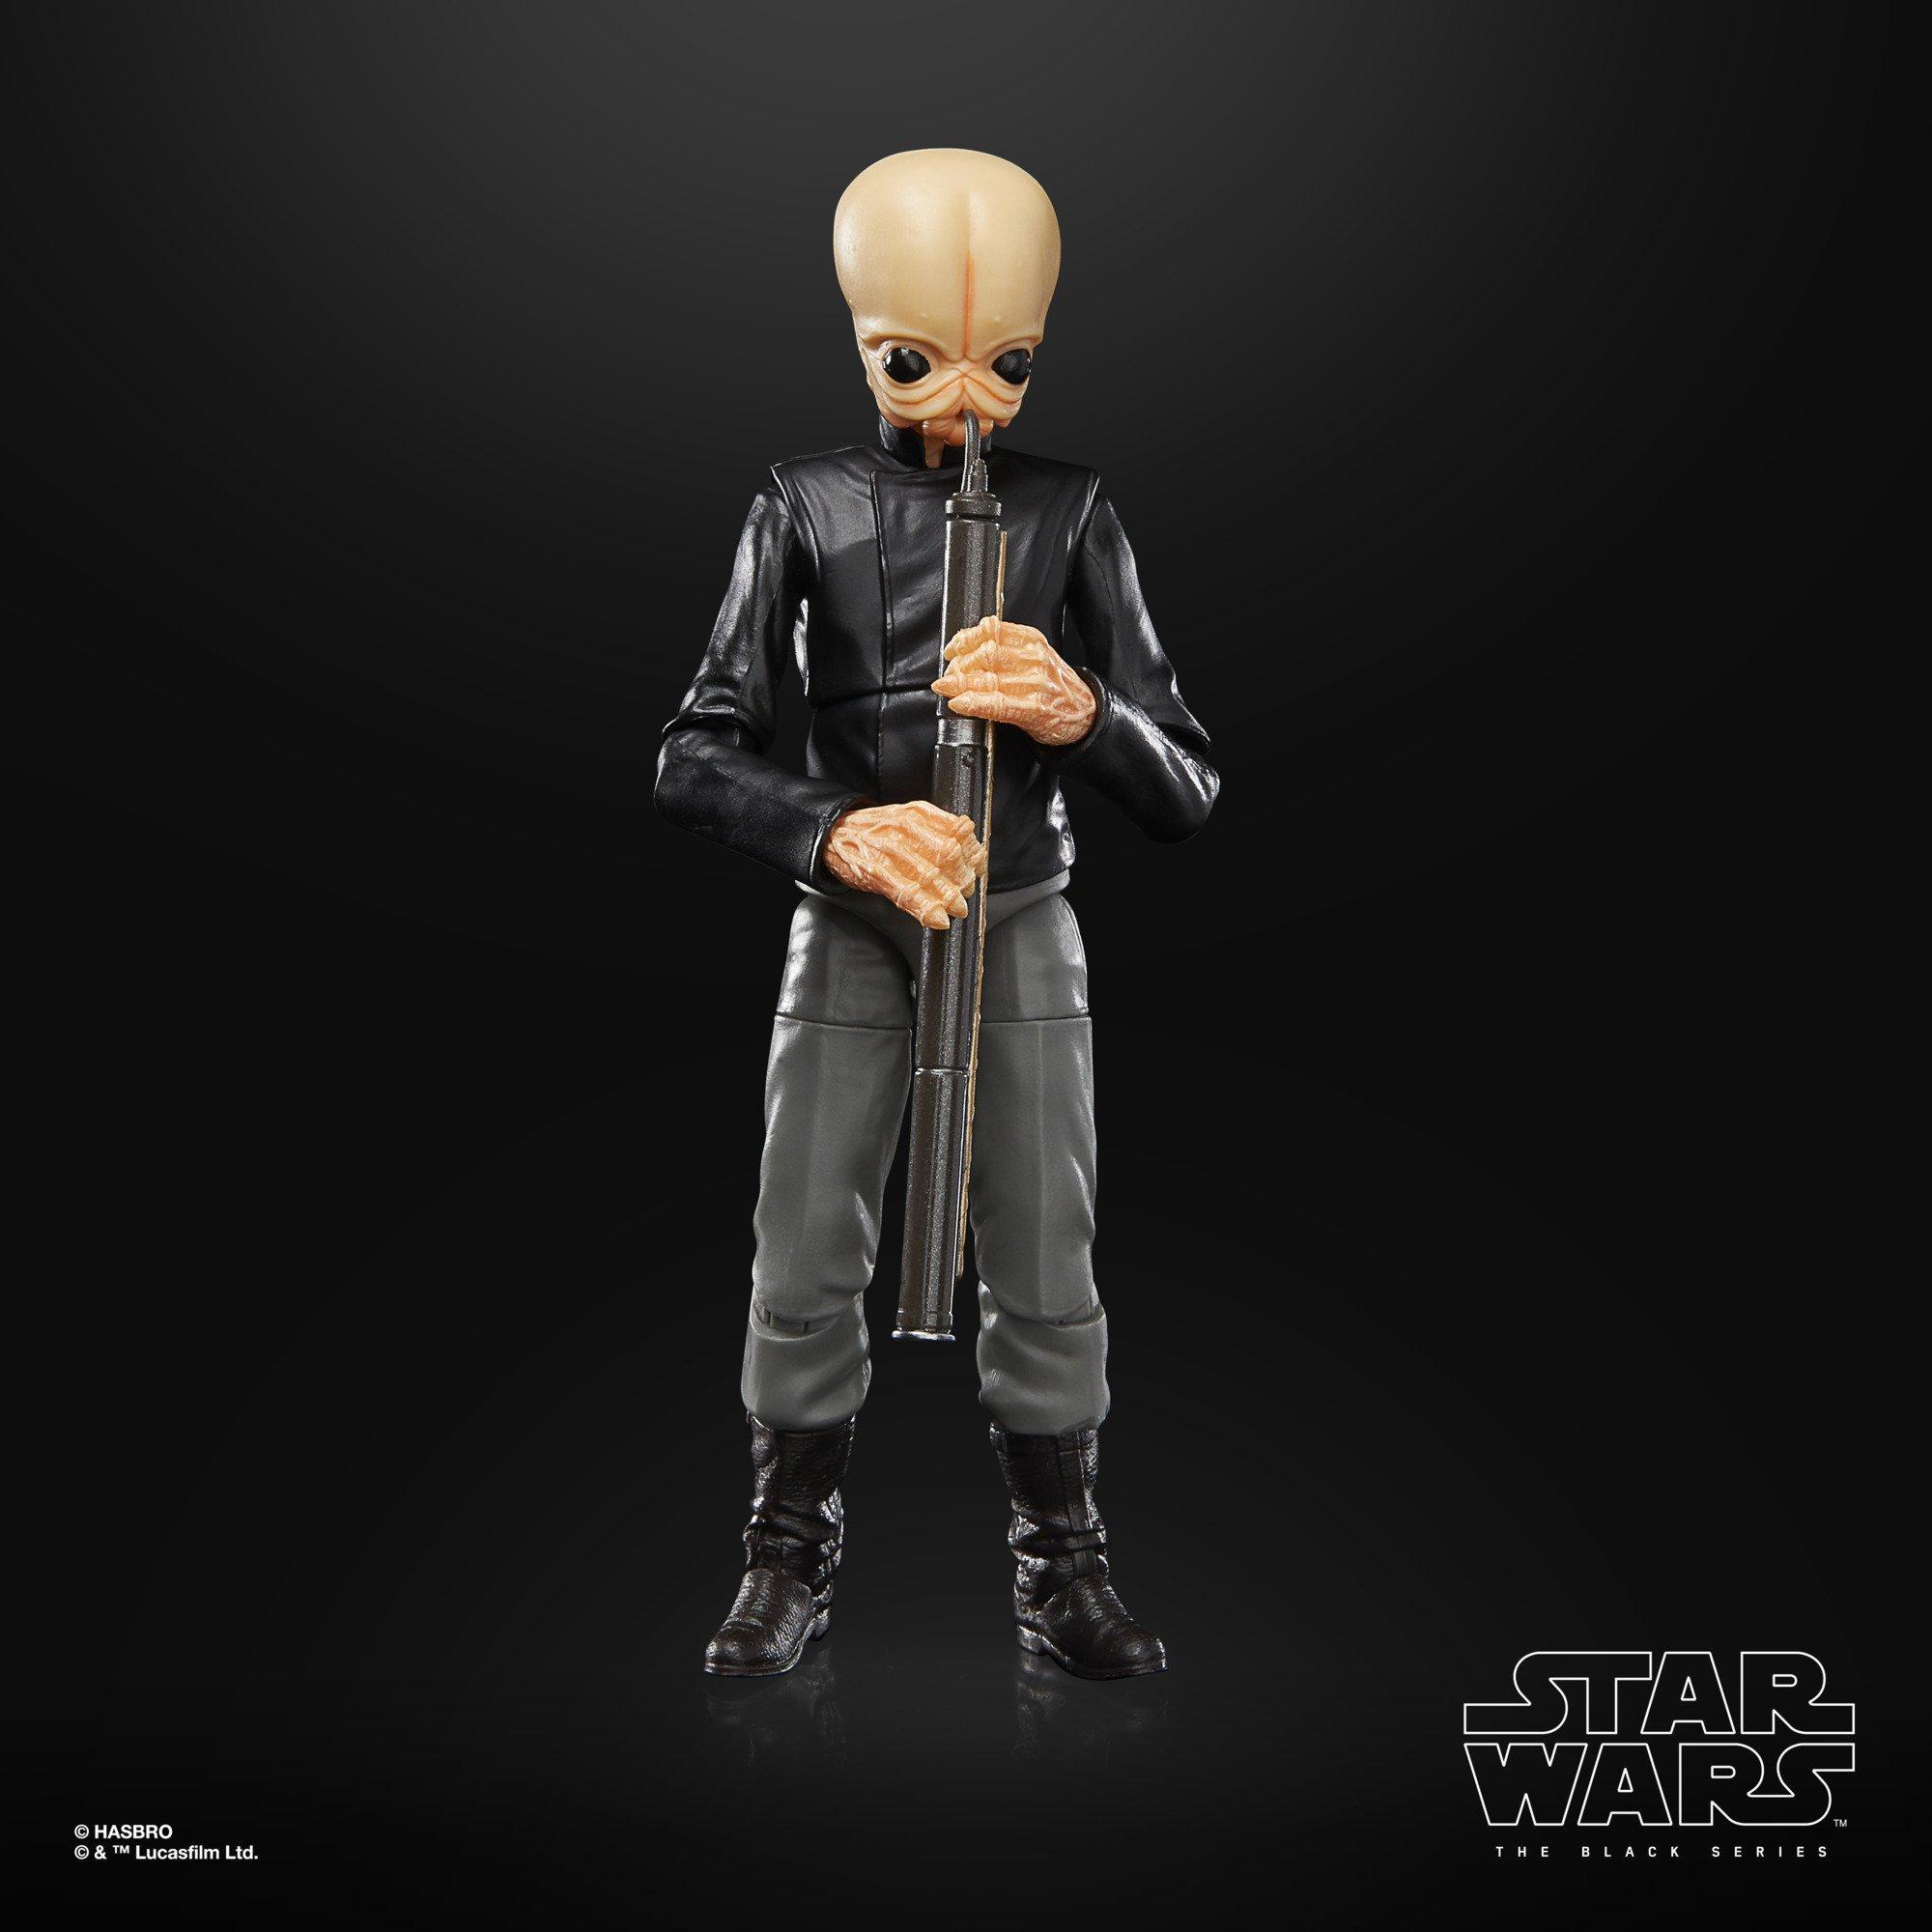 Hasbro Star Wars: The Black Series A New Hope Figrin D'an 6-in Action Figure